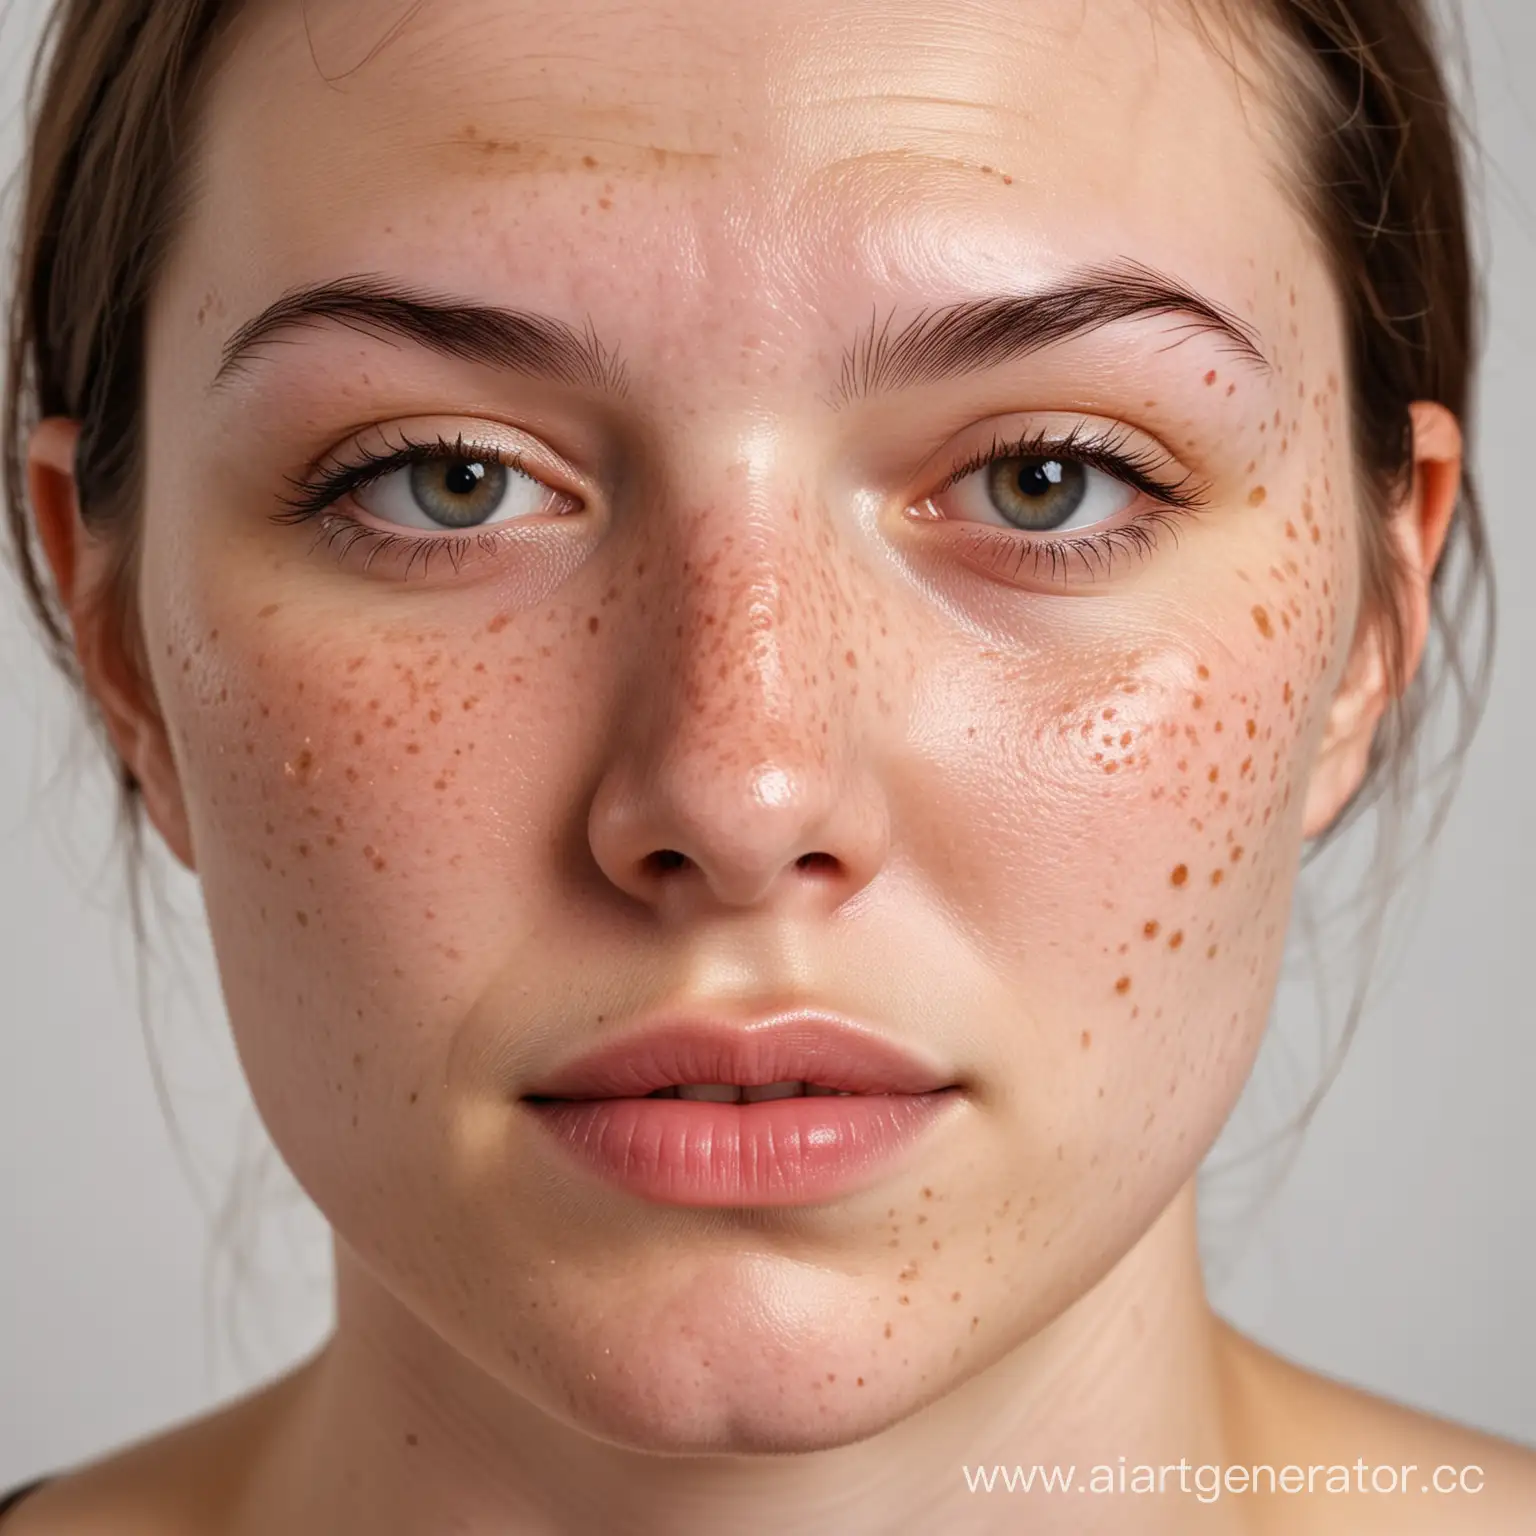 Portrait-of-a-Real-Person-with-Acne-Authentic-Skin-Imperfections-Captured-in-CloseUp